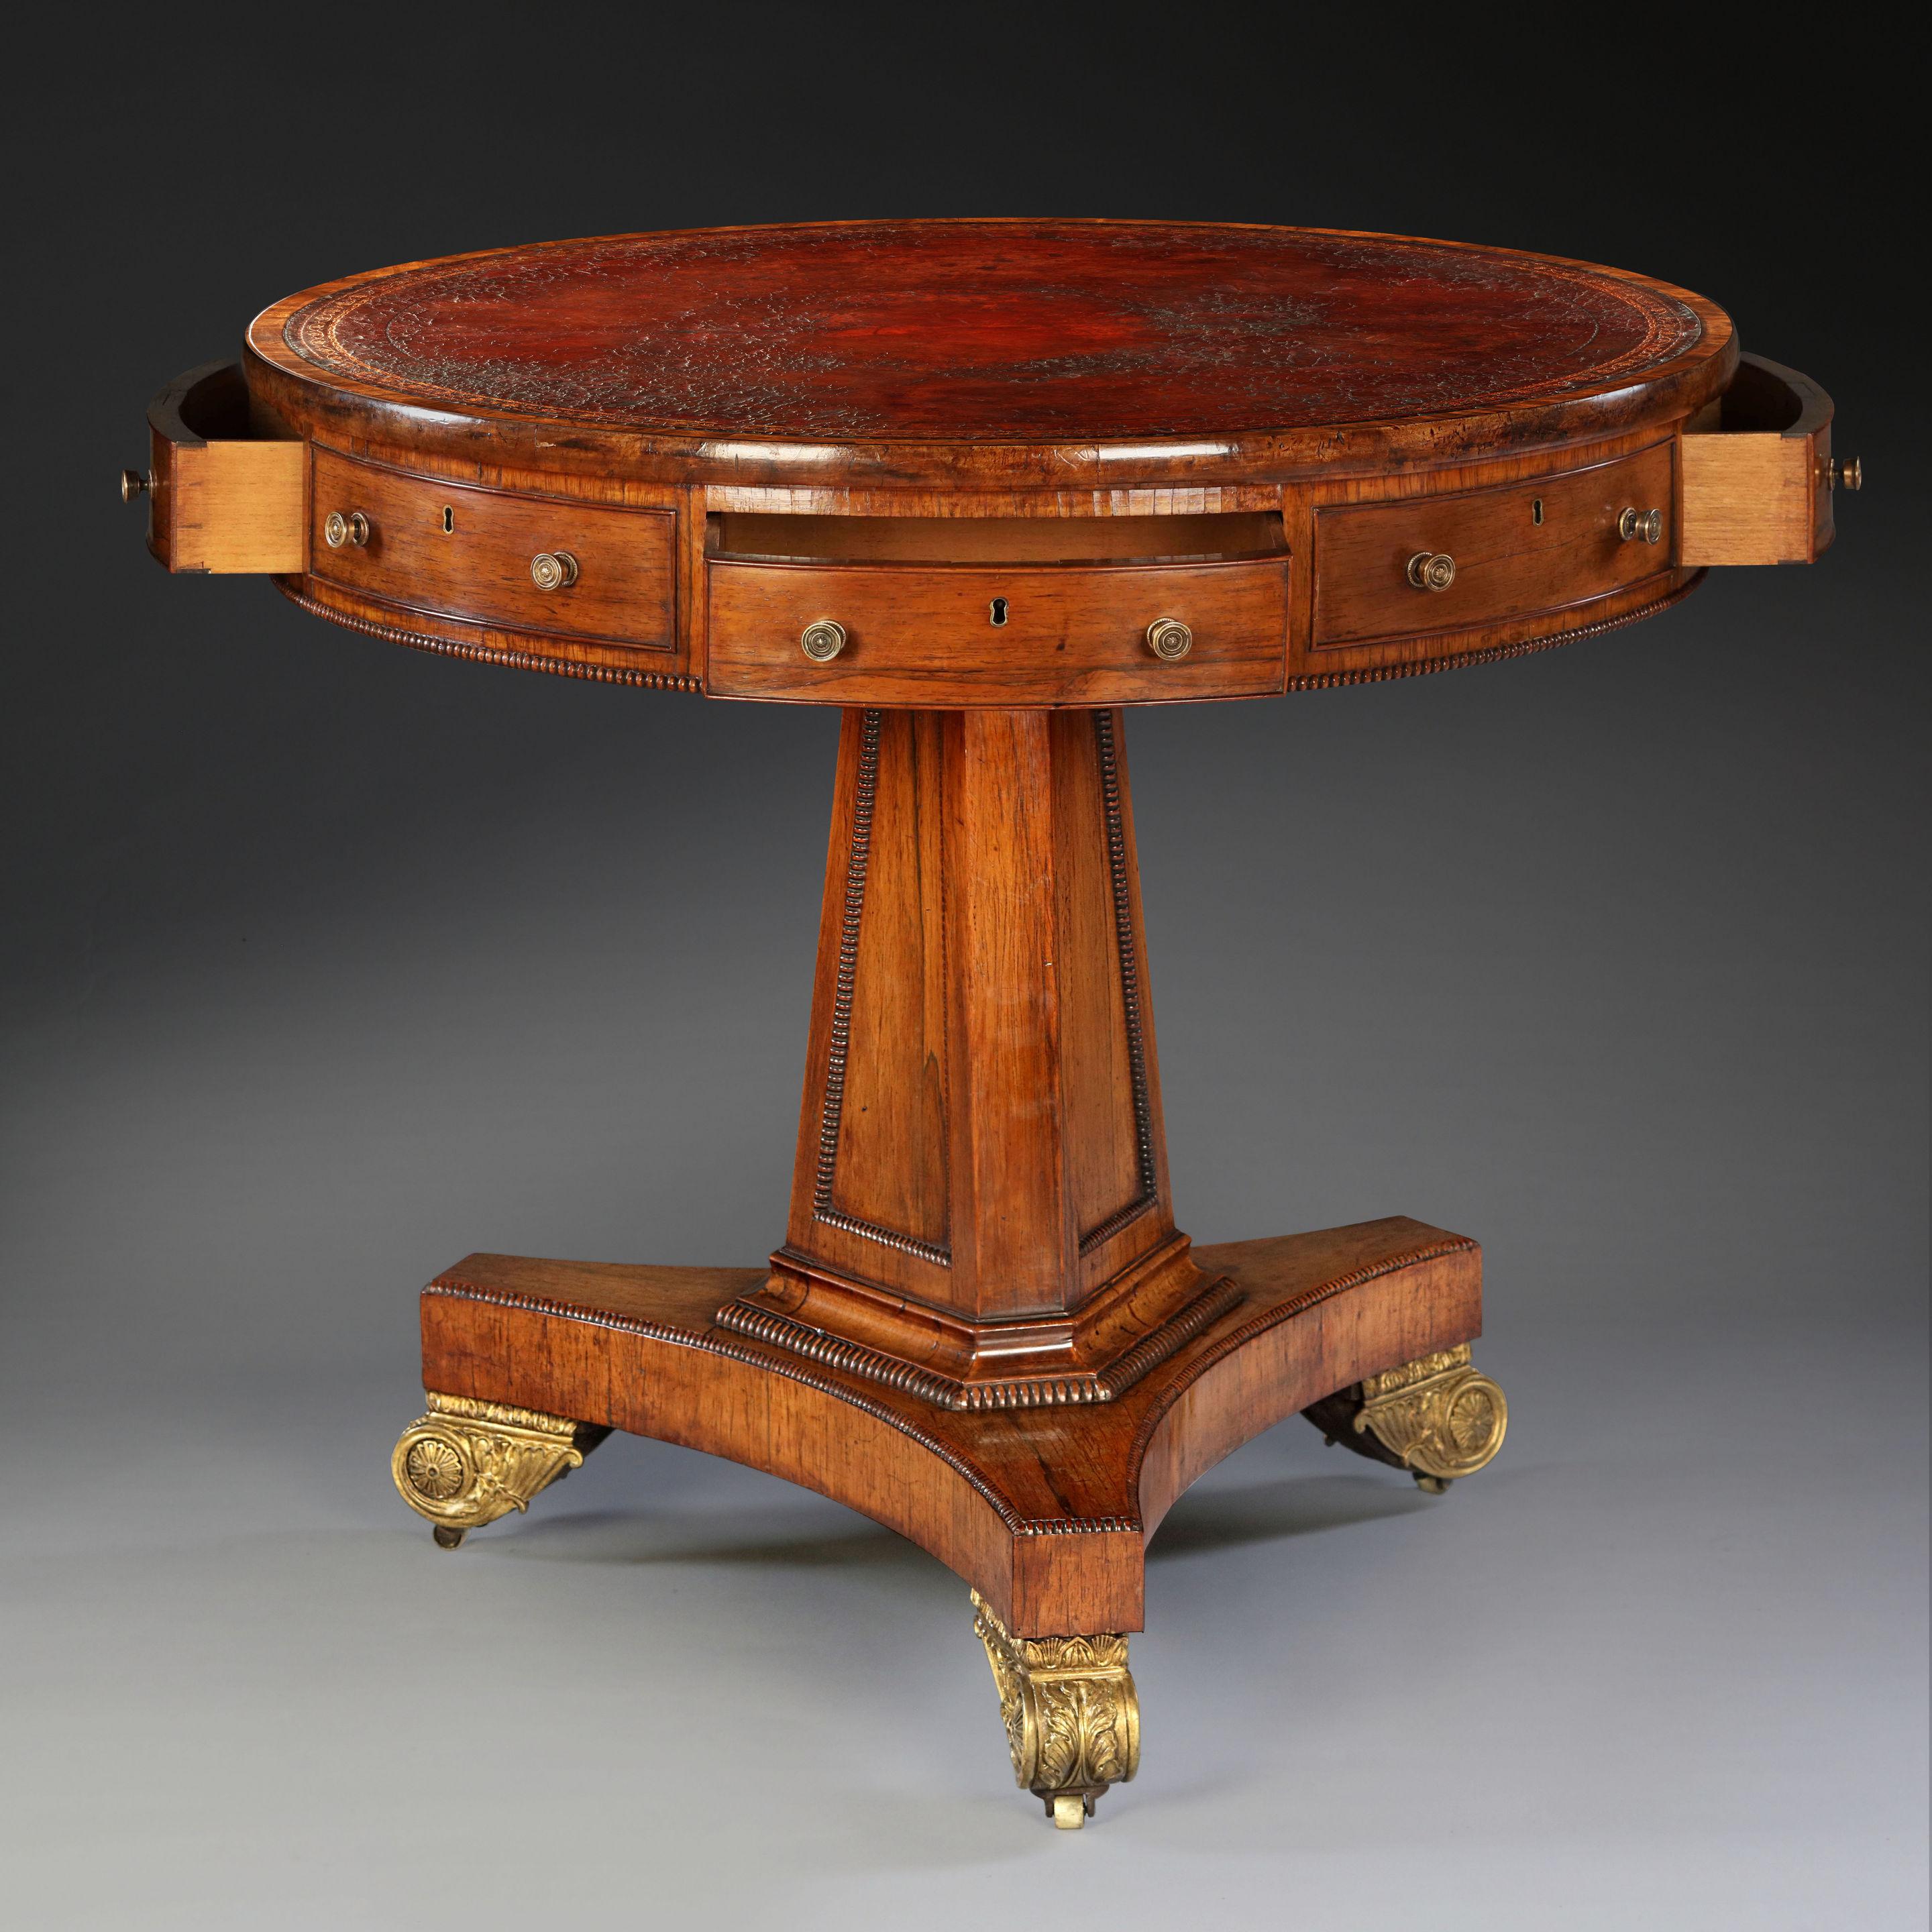 Georgian George III Rosewood and Mahogany Drum Table / Centre Table